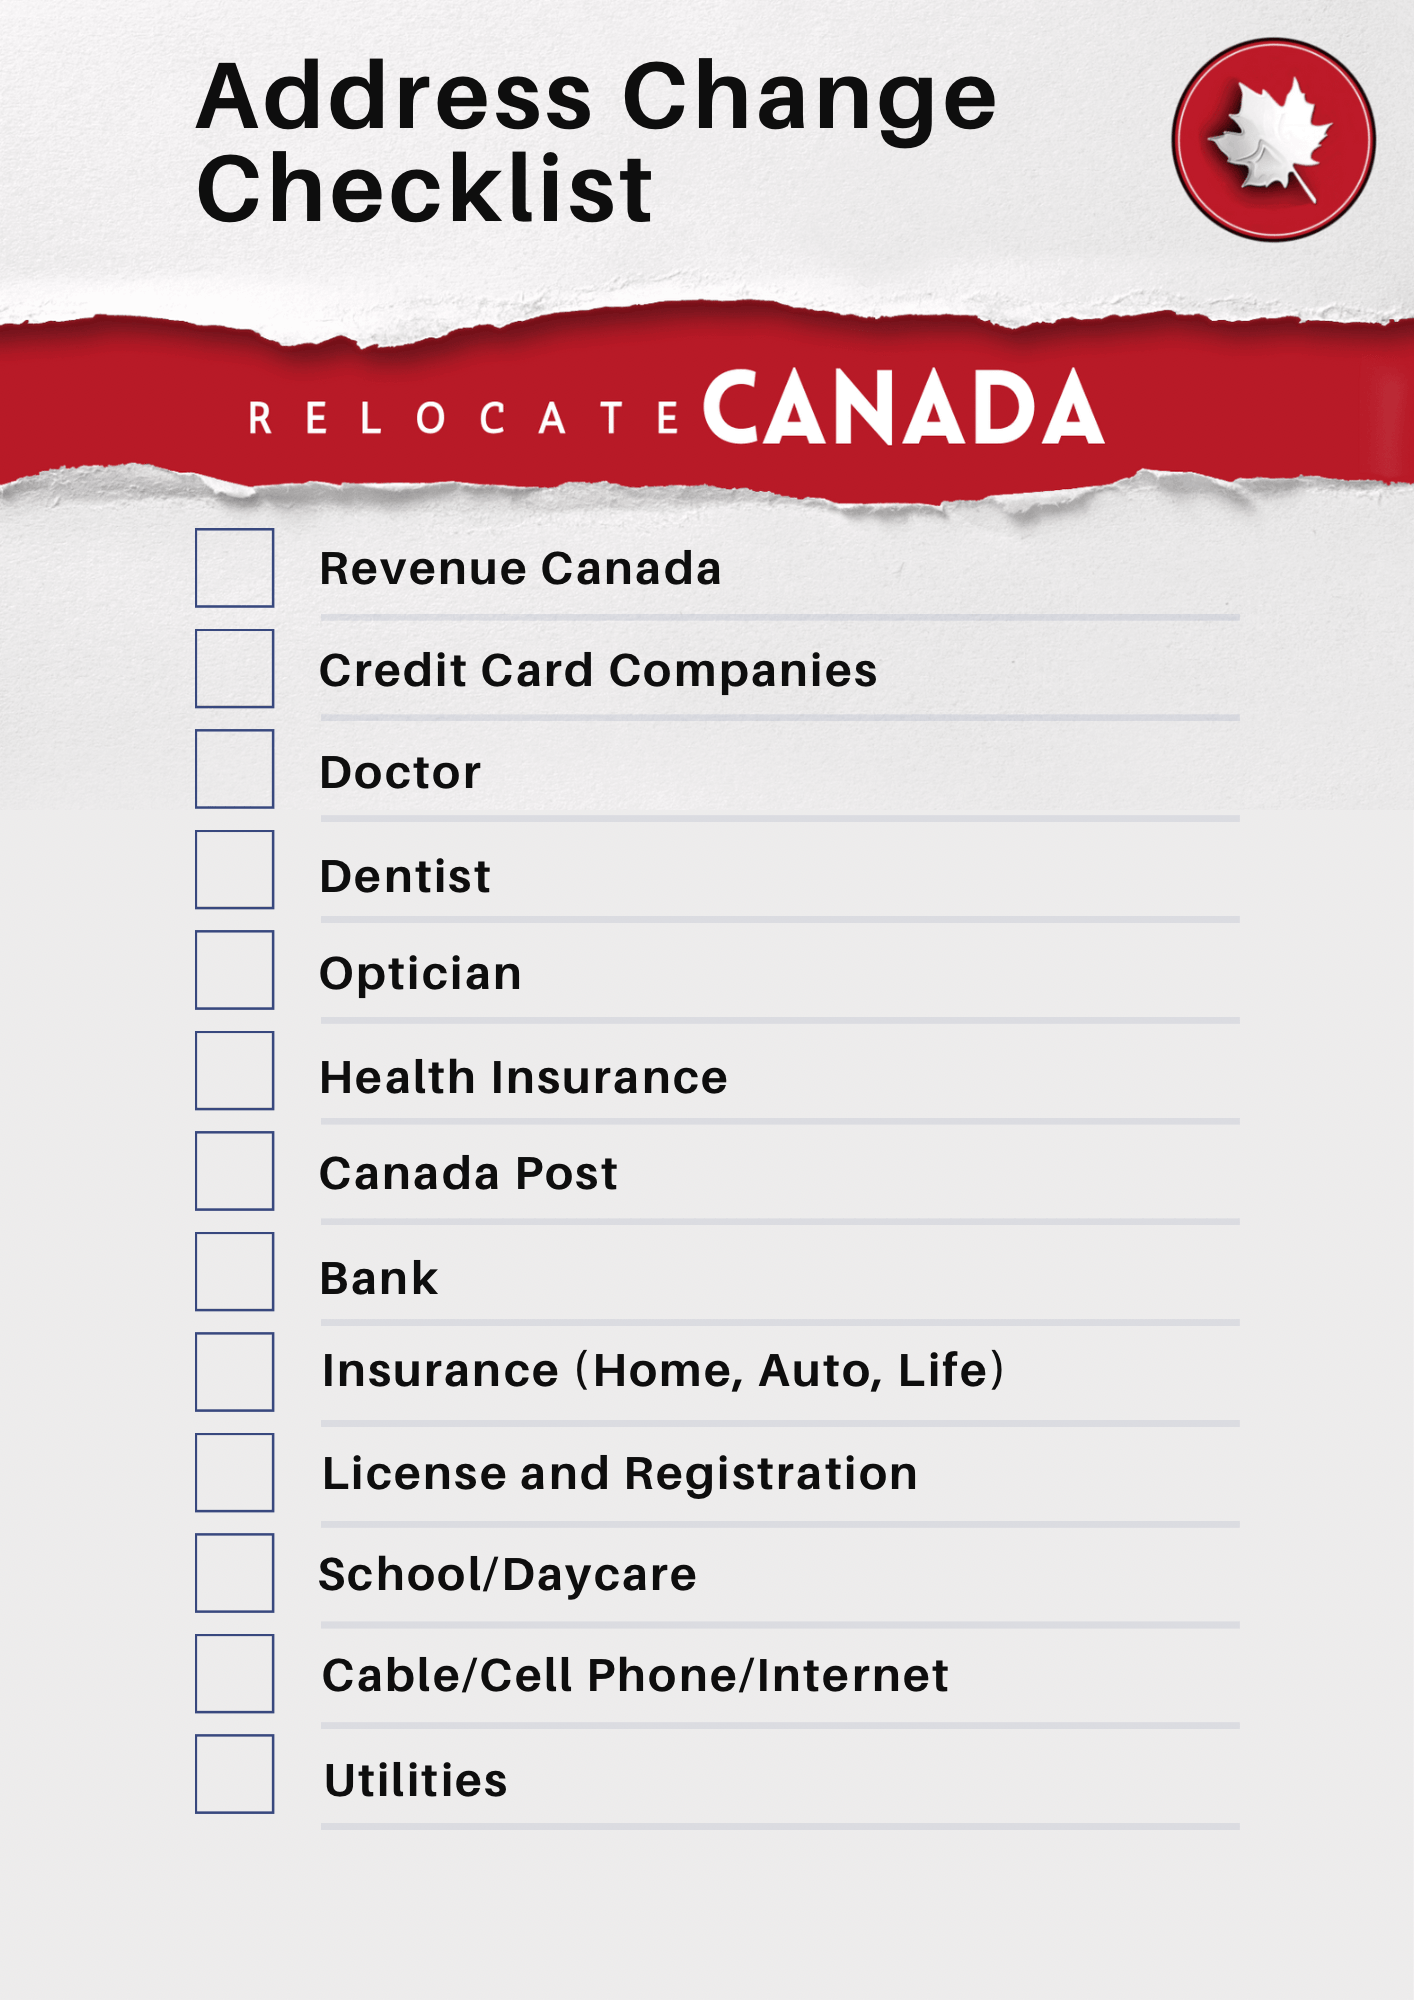 Change of Address Checklist For Canada